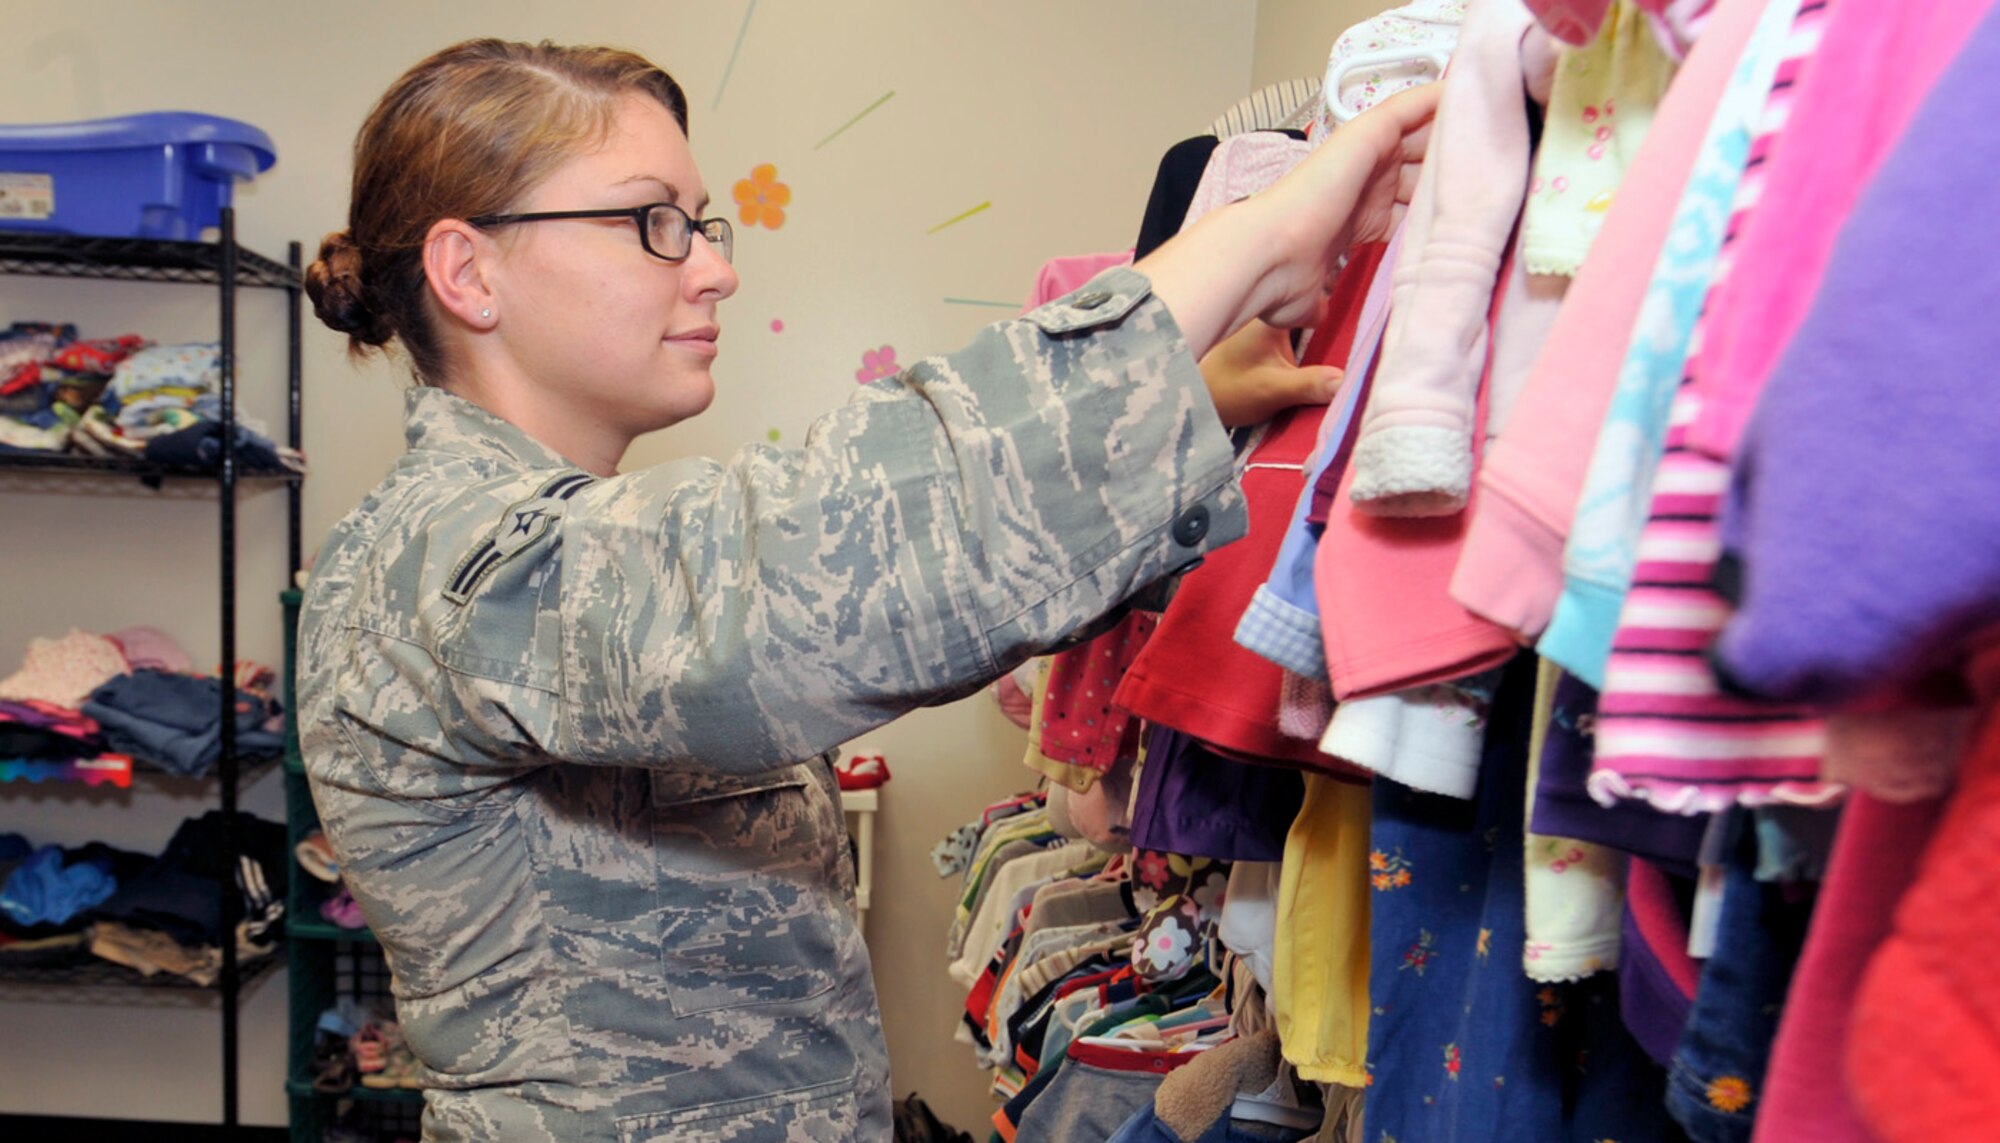 Airman 1st Class Rachel Simmons sorts through children's clothing Sep. 6, 2012, at the Airmen's Attic on Dover Air Force Base, Del. Simmons is the Airman Coordinator for the Airmen's Attic. (U.S. Air Force photo by Tech. Sgt. Chuck Walker)